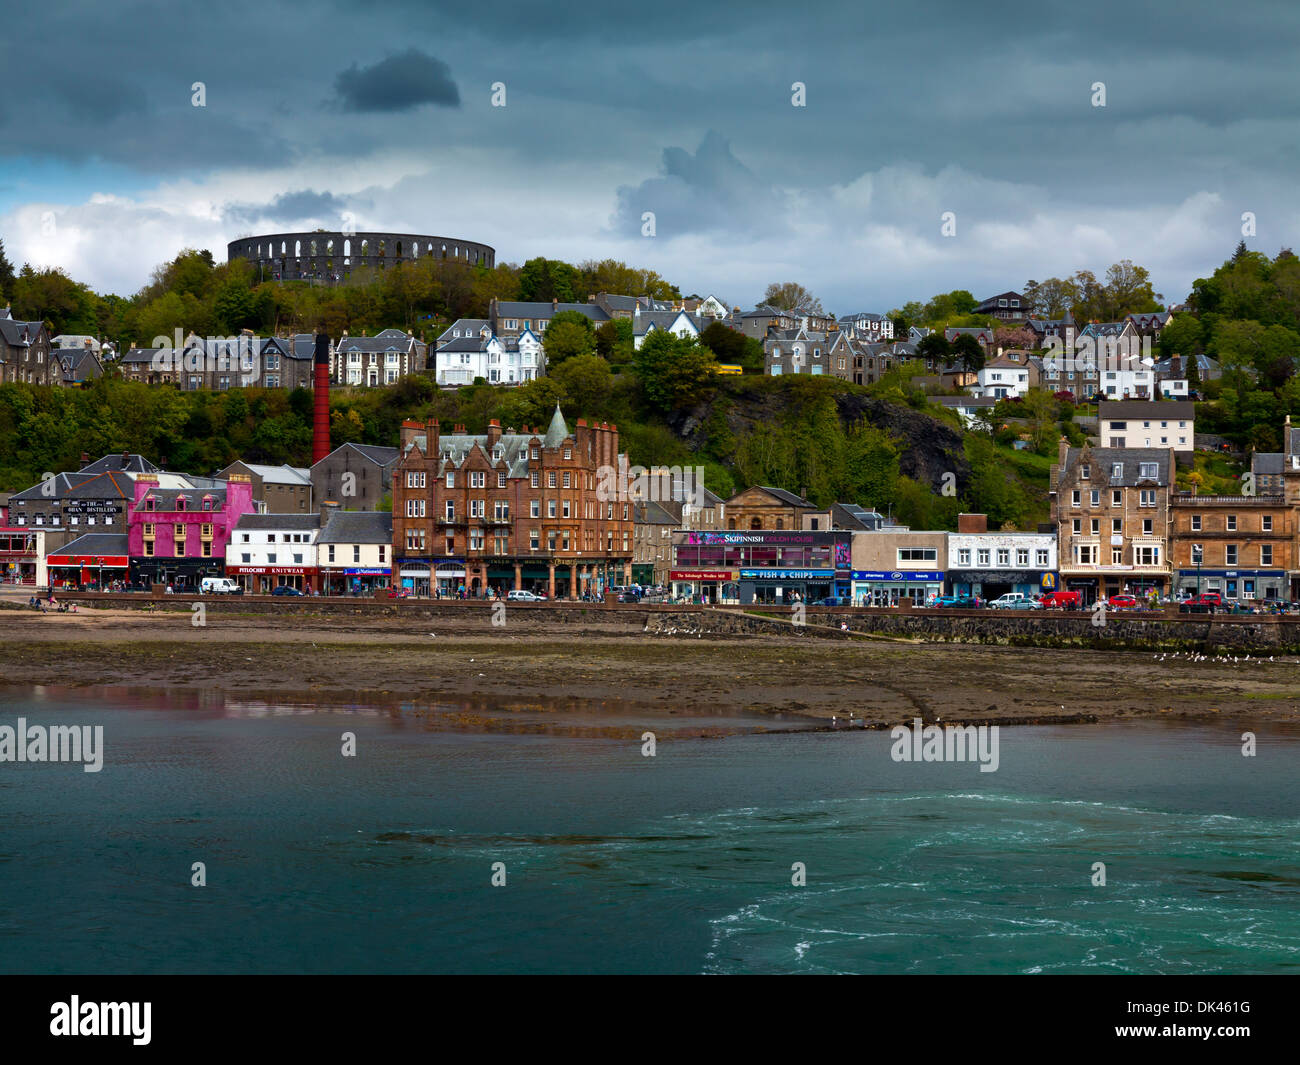 View across the seafront at Oban in Argyll and Bute Scotland UK a resort town with McCaig's Tower visible on the hill above Stock Photo